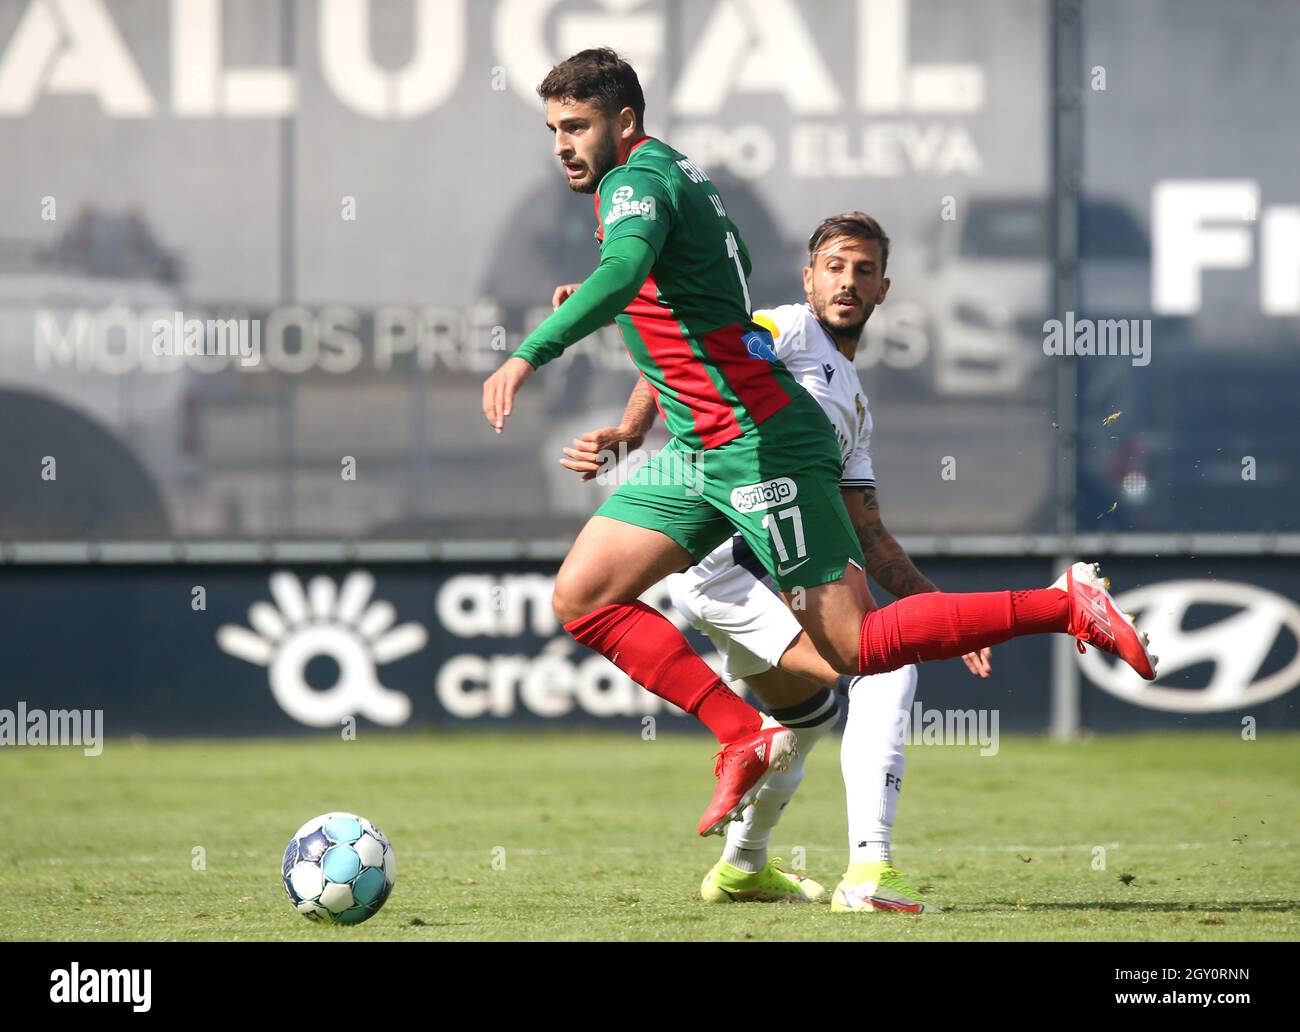 FAMALICAO, PORTUGAL - SEPTEMBER 18: Bruno Xadas of CS Maritimo competes for the ball with Diogo Figueiras FC Famalicao ,during the Liga Portugal Bwin match between FC Famalicao and CS Maritimo at Estadio Municipal on September 18, 2021 in Famalicao, Portugal. (Photo by MB Media) Stock Photo